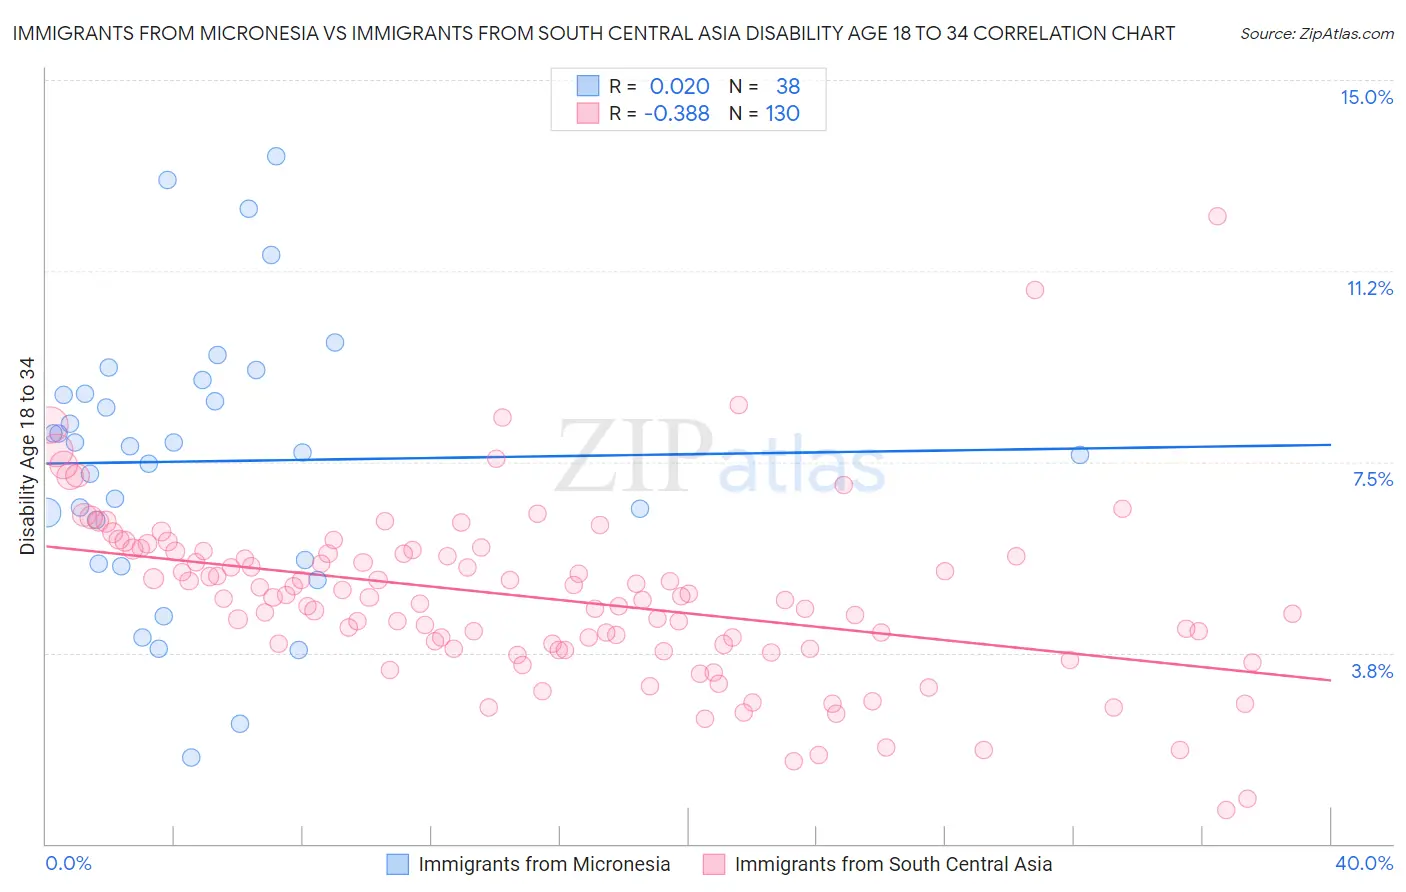 Immigrants from Micronesia vs Immigrants from South Central Asia Disability Age 18 to 34